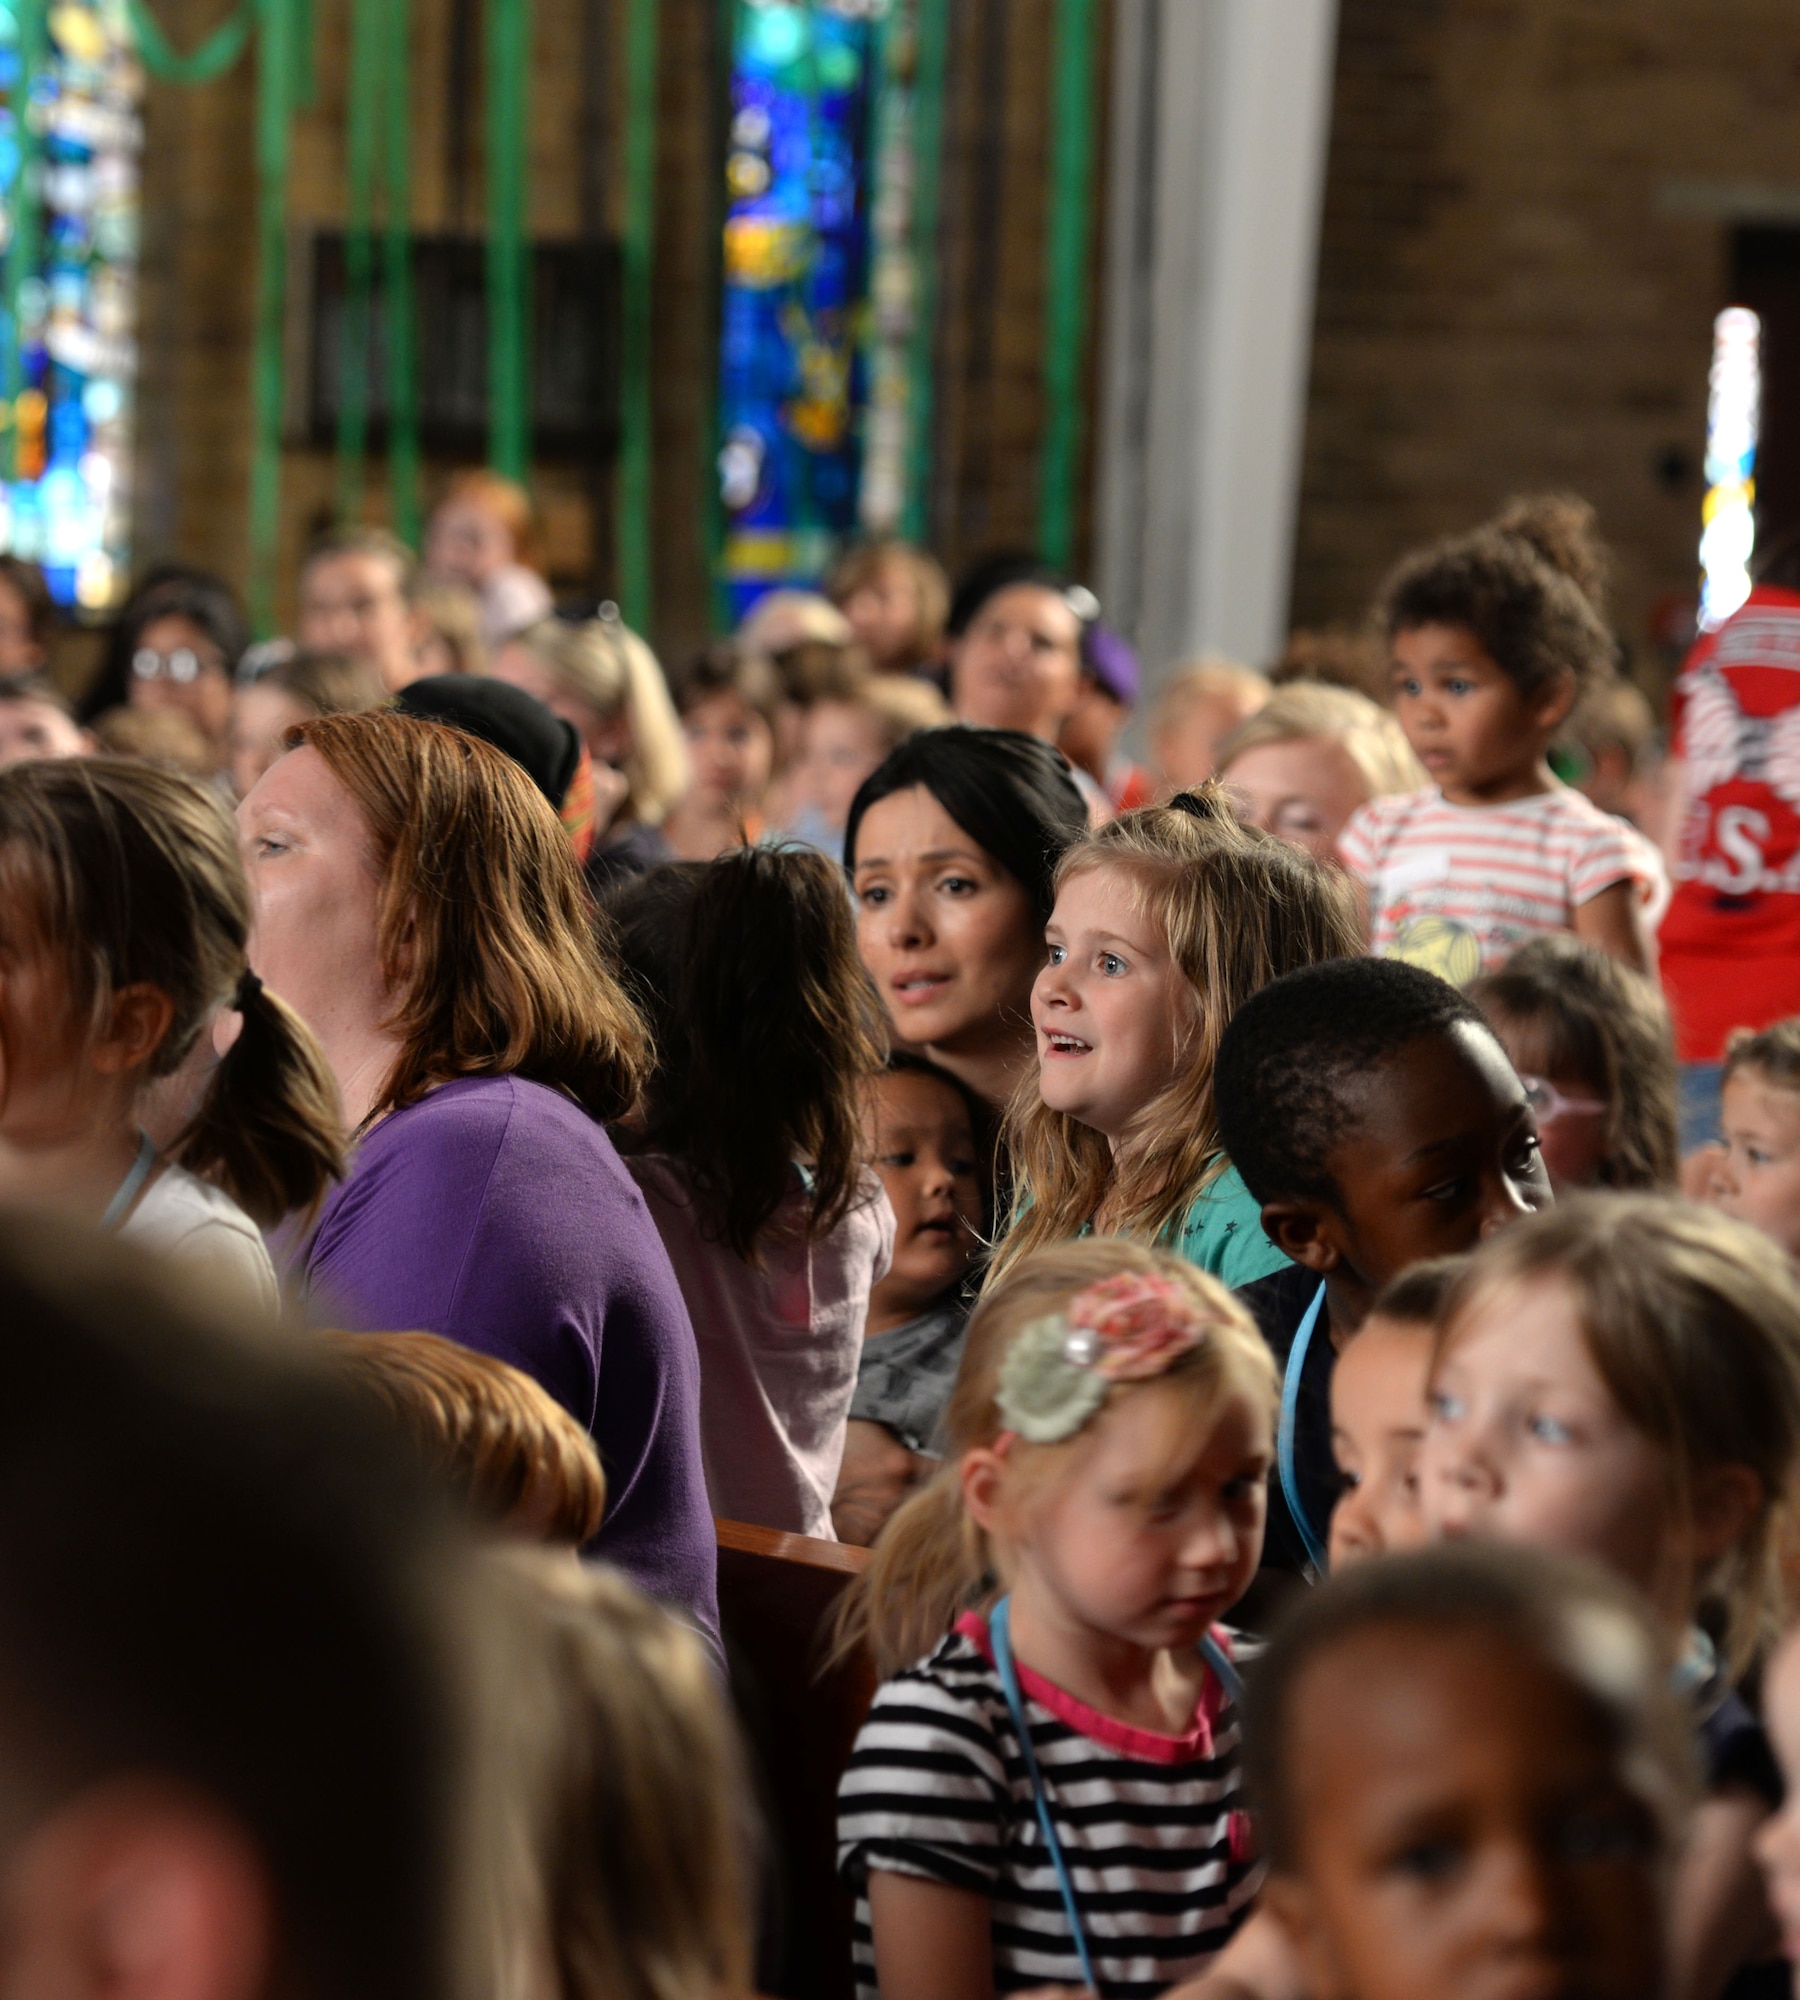 Team Mildenhall children and parents take part in Vacation Bible School July 25, 2016, in the chapel on RAF Mildenhall, England. The chapel hosts this event annually to bring families together. (U.S. Air Force photo by Gina Randall)